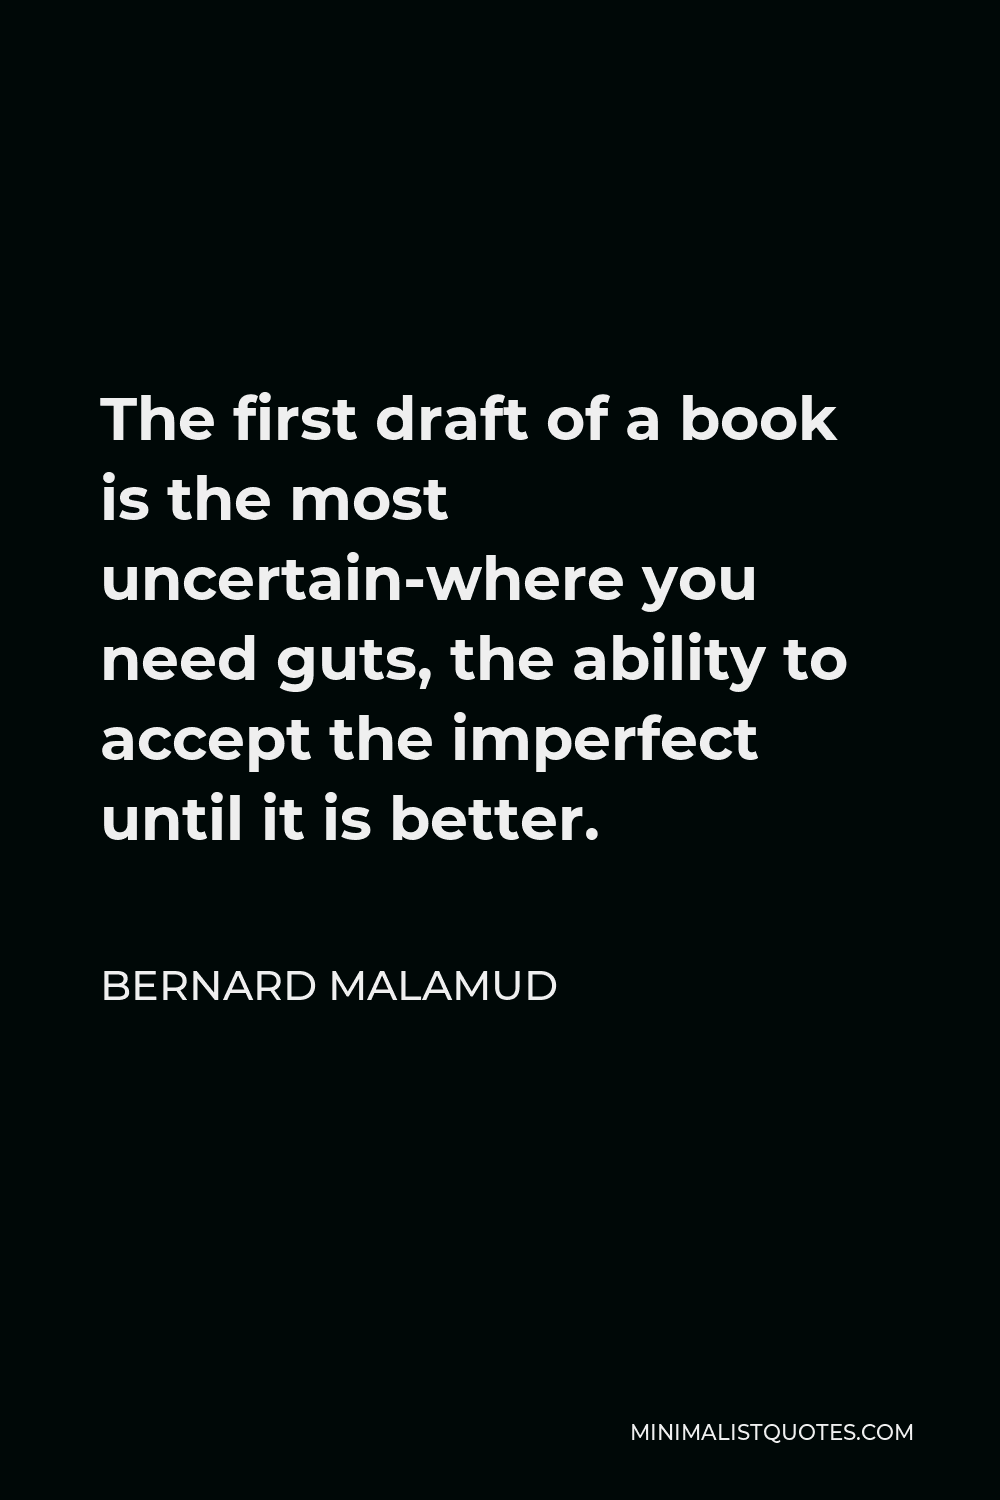 Bernard Malamud Quote - The first draft of a book is the most uncertain-where you need guts, the ability to accept the imperfect until it is better.